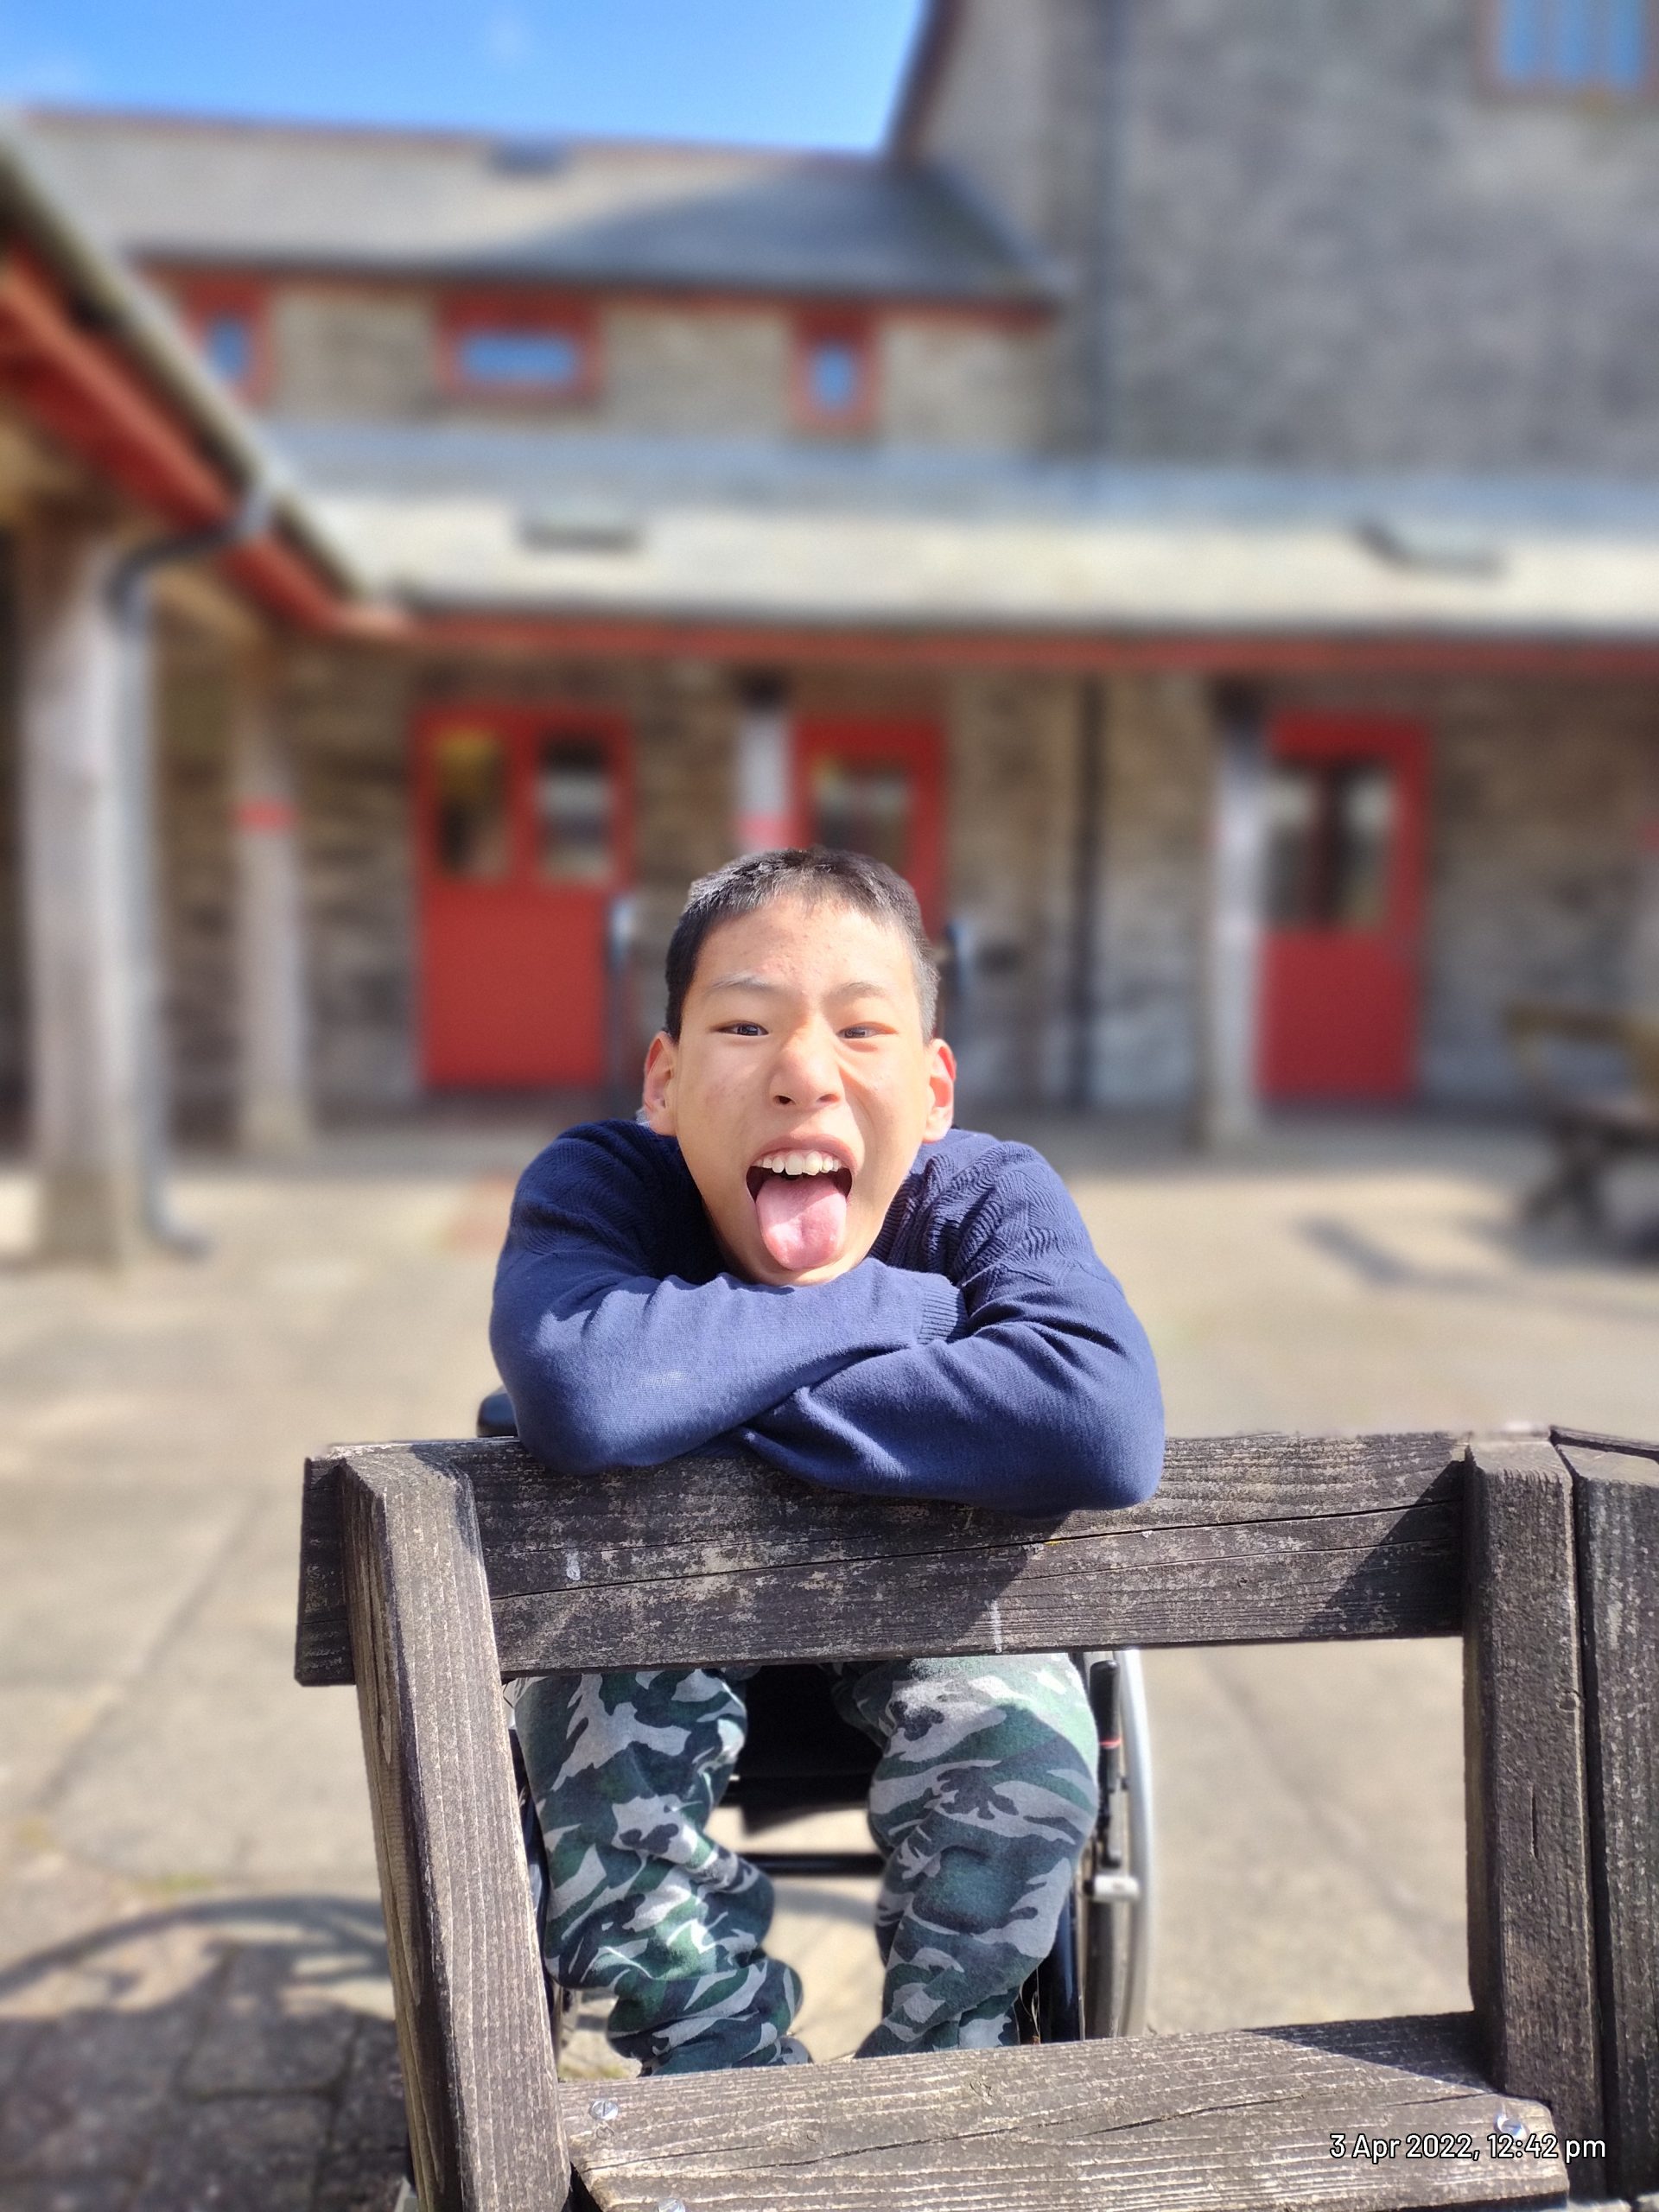 A boy wearing a blue sweatshirt and camouflaged trousers is leaning on the back of a bench and sticking his tongue out at the camera.